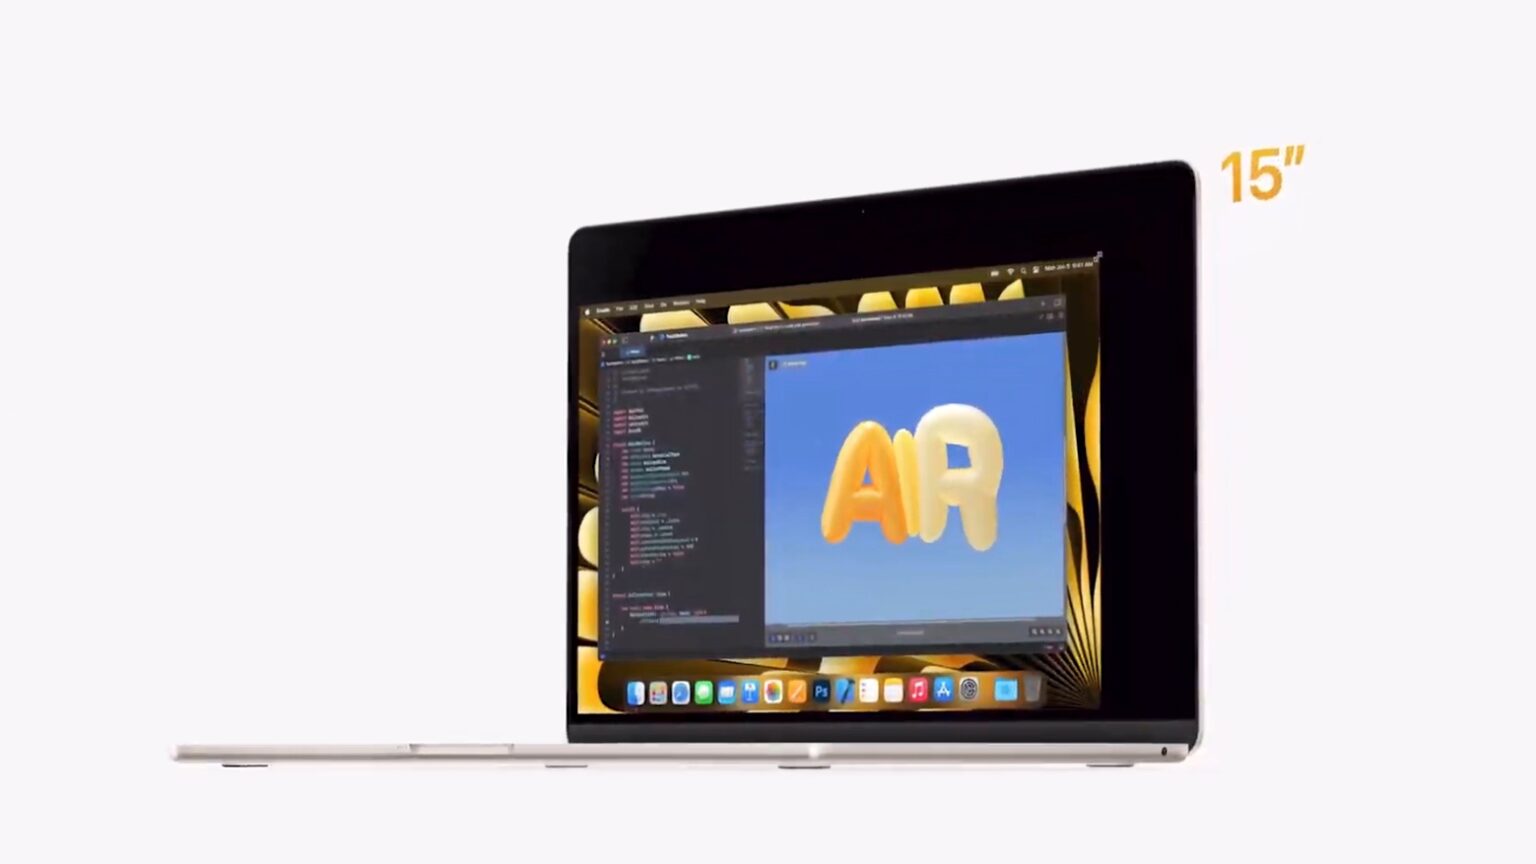 New super-size MacBook Air is 'world's thinnest 15-inch laptop'